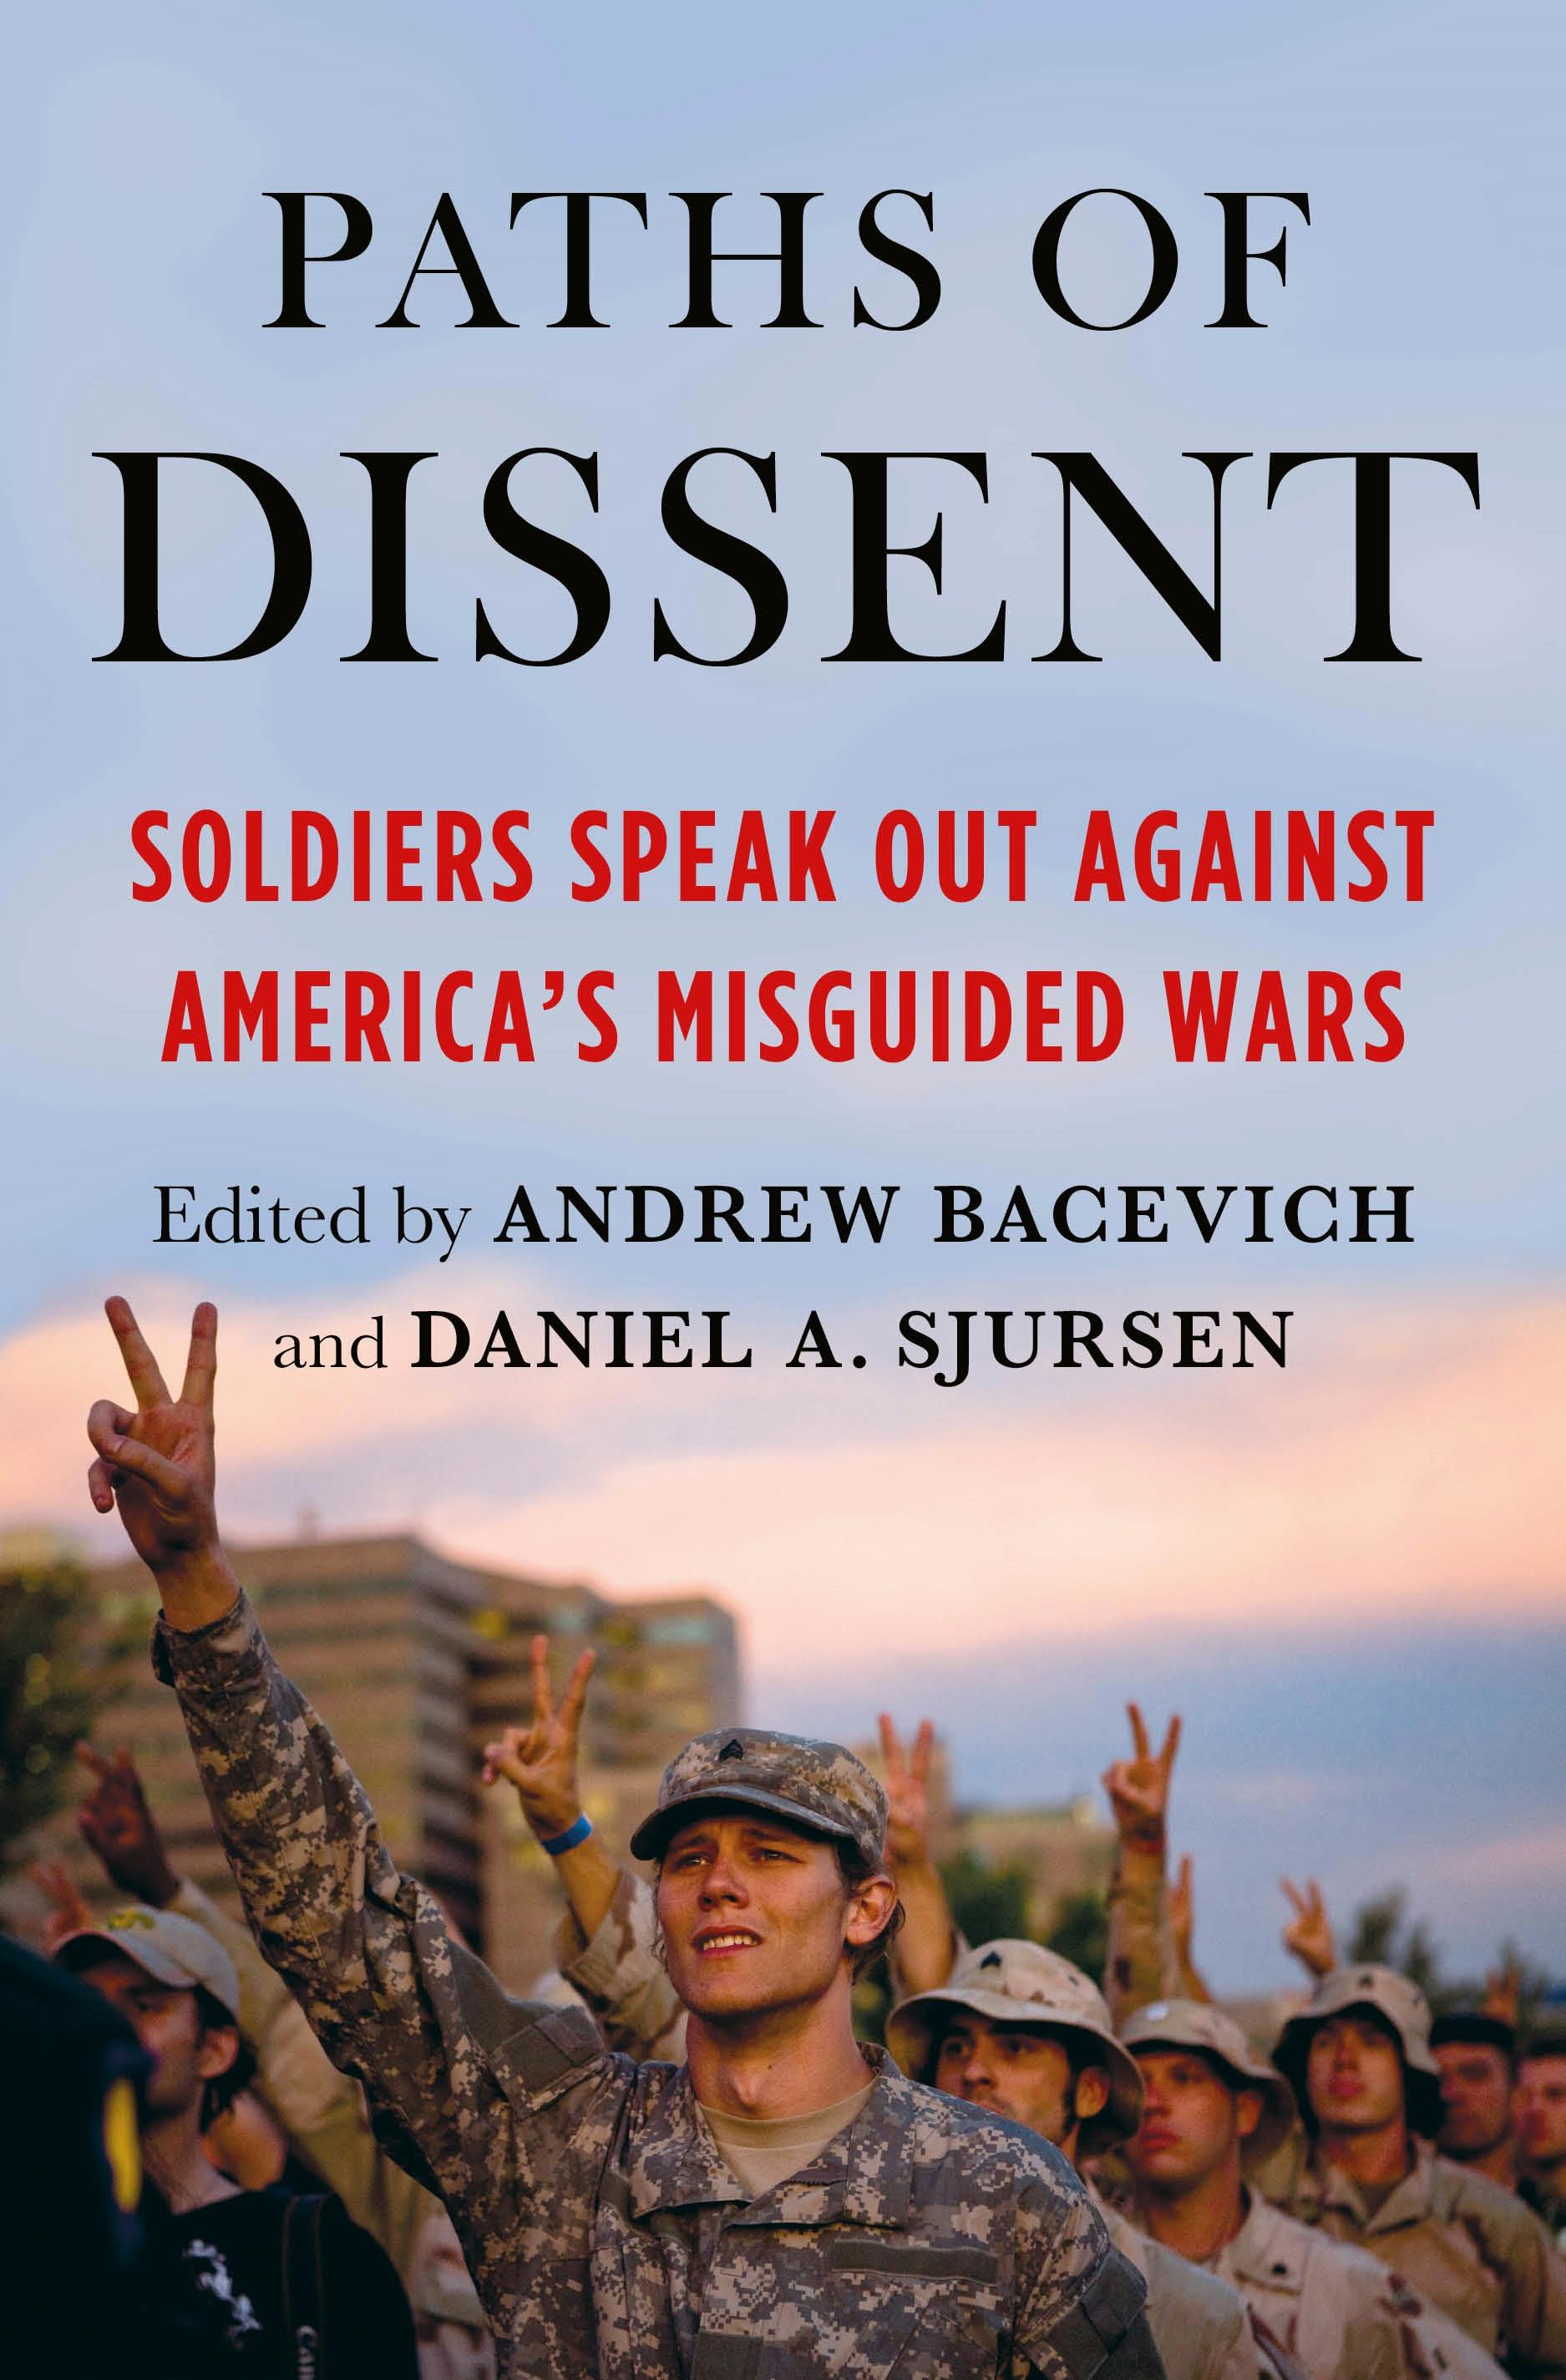 Paths of Dissent by Andrew Bacevich and Daniel A. Sjursen